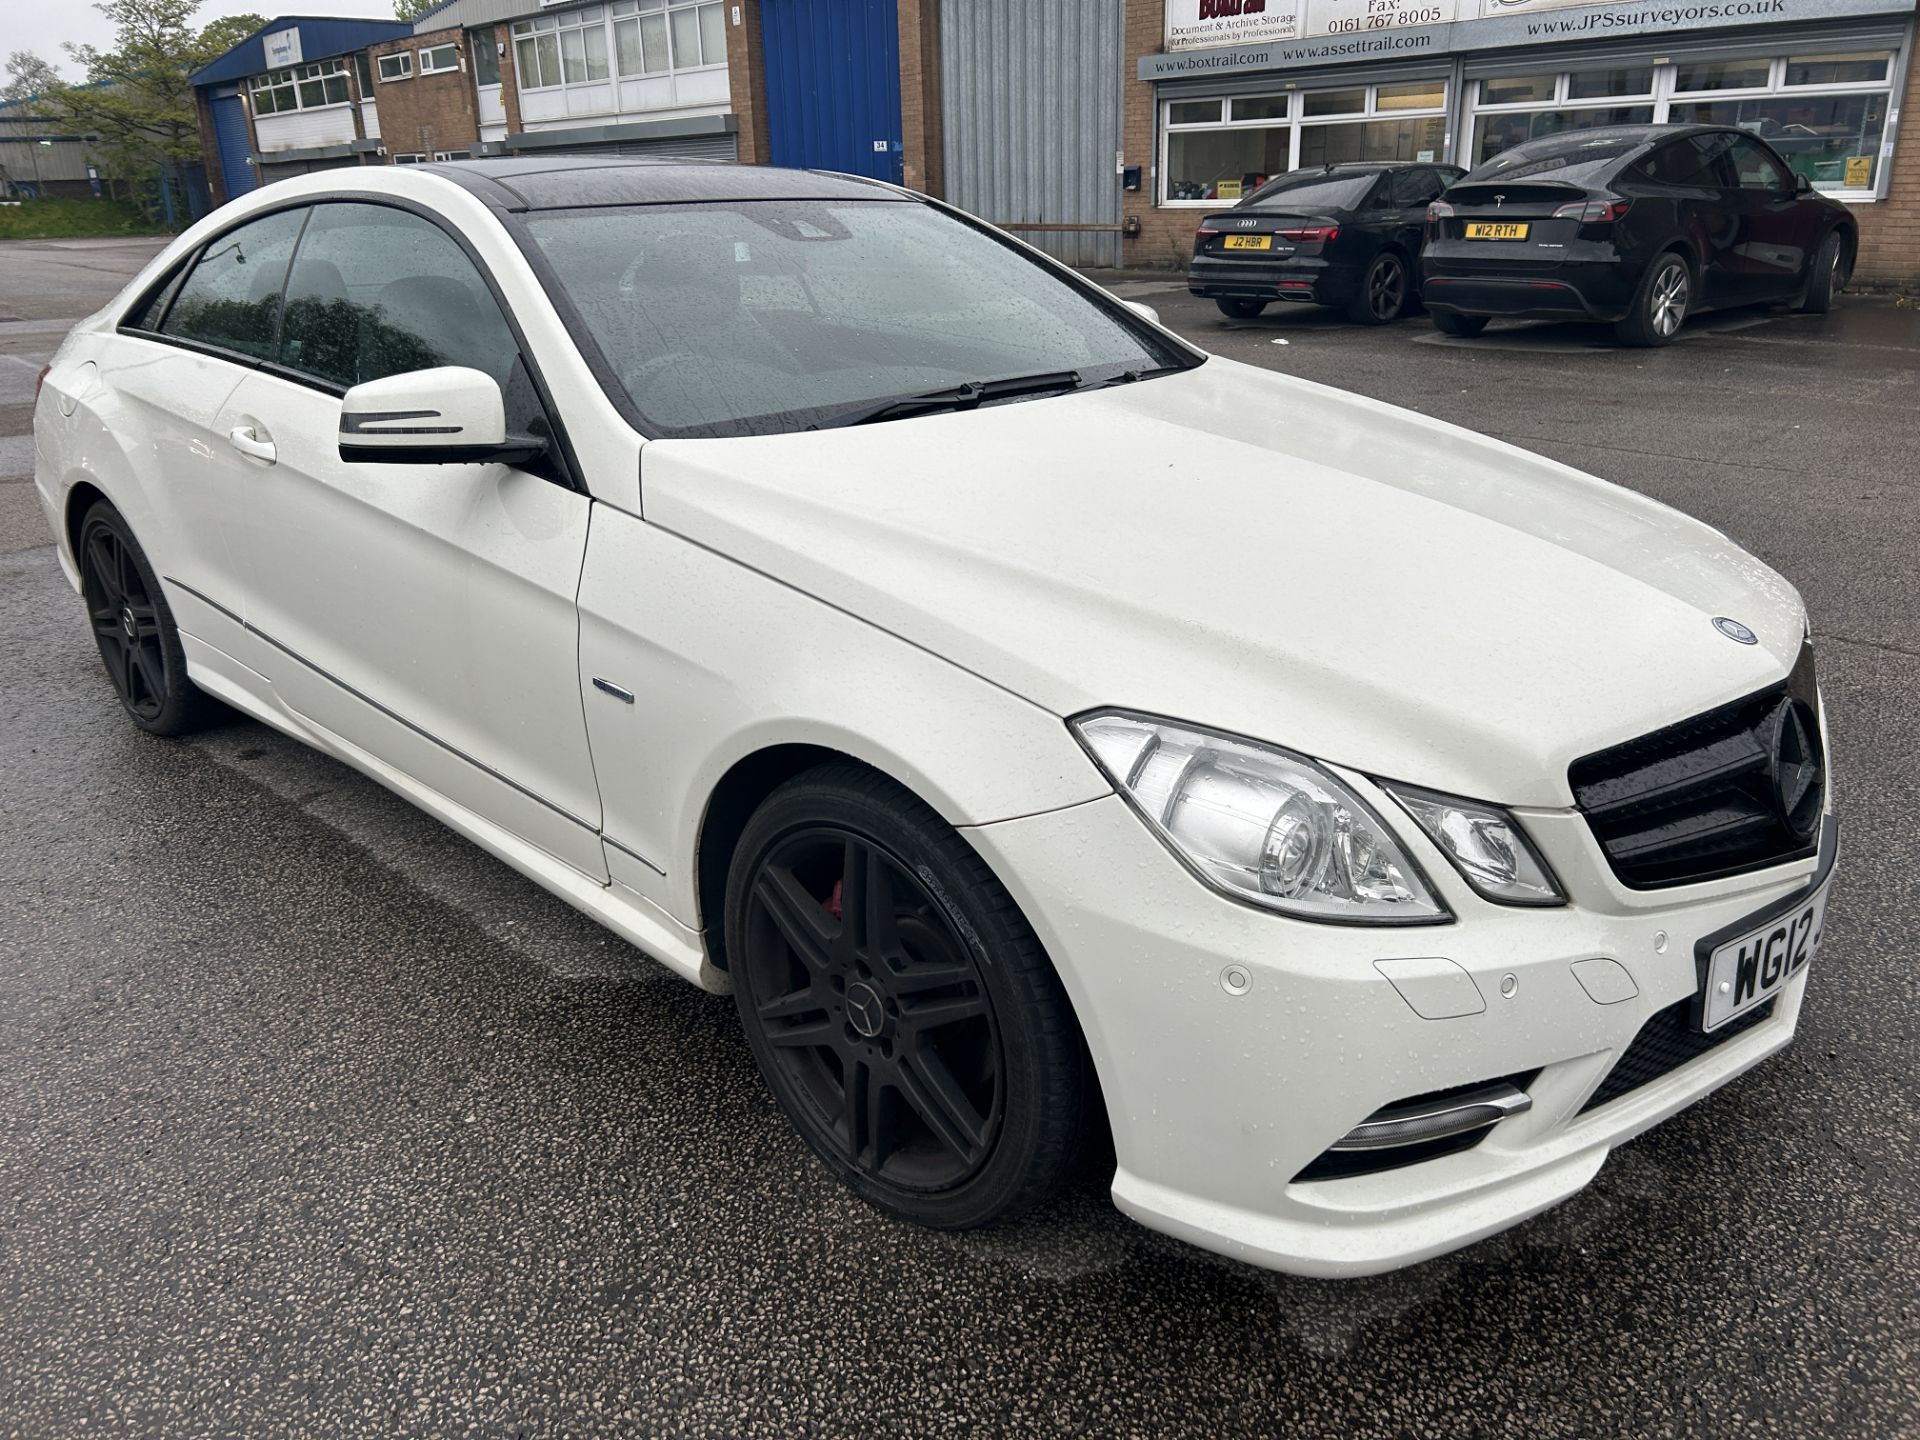 Mercedes Benz E350 SPT CDI BLUECY 265 A | WG12 JWA | Automatic | Diesel | 88,106 Miles | SEE DESCRI - Image 3 of 12